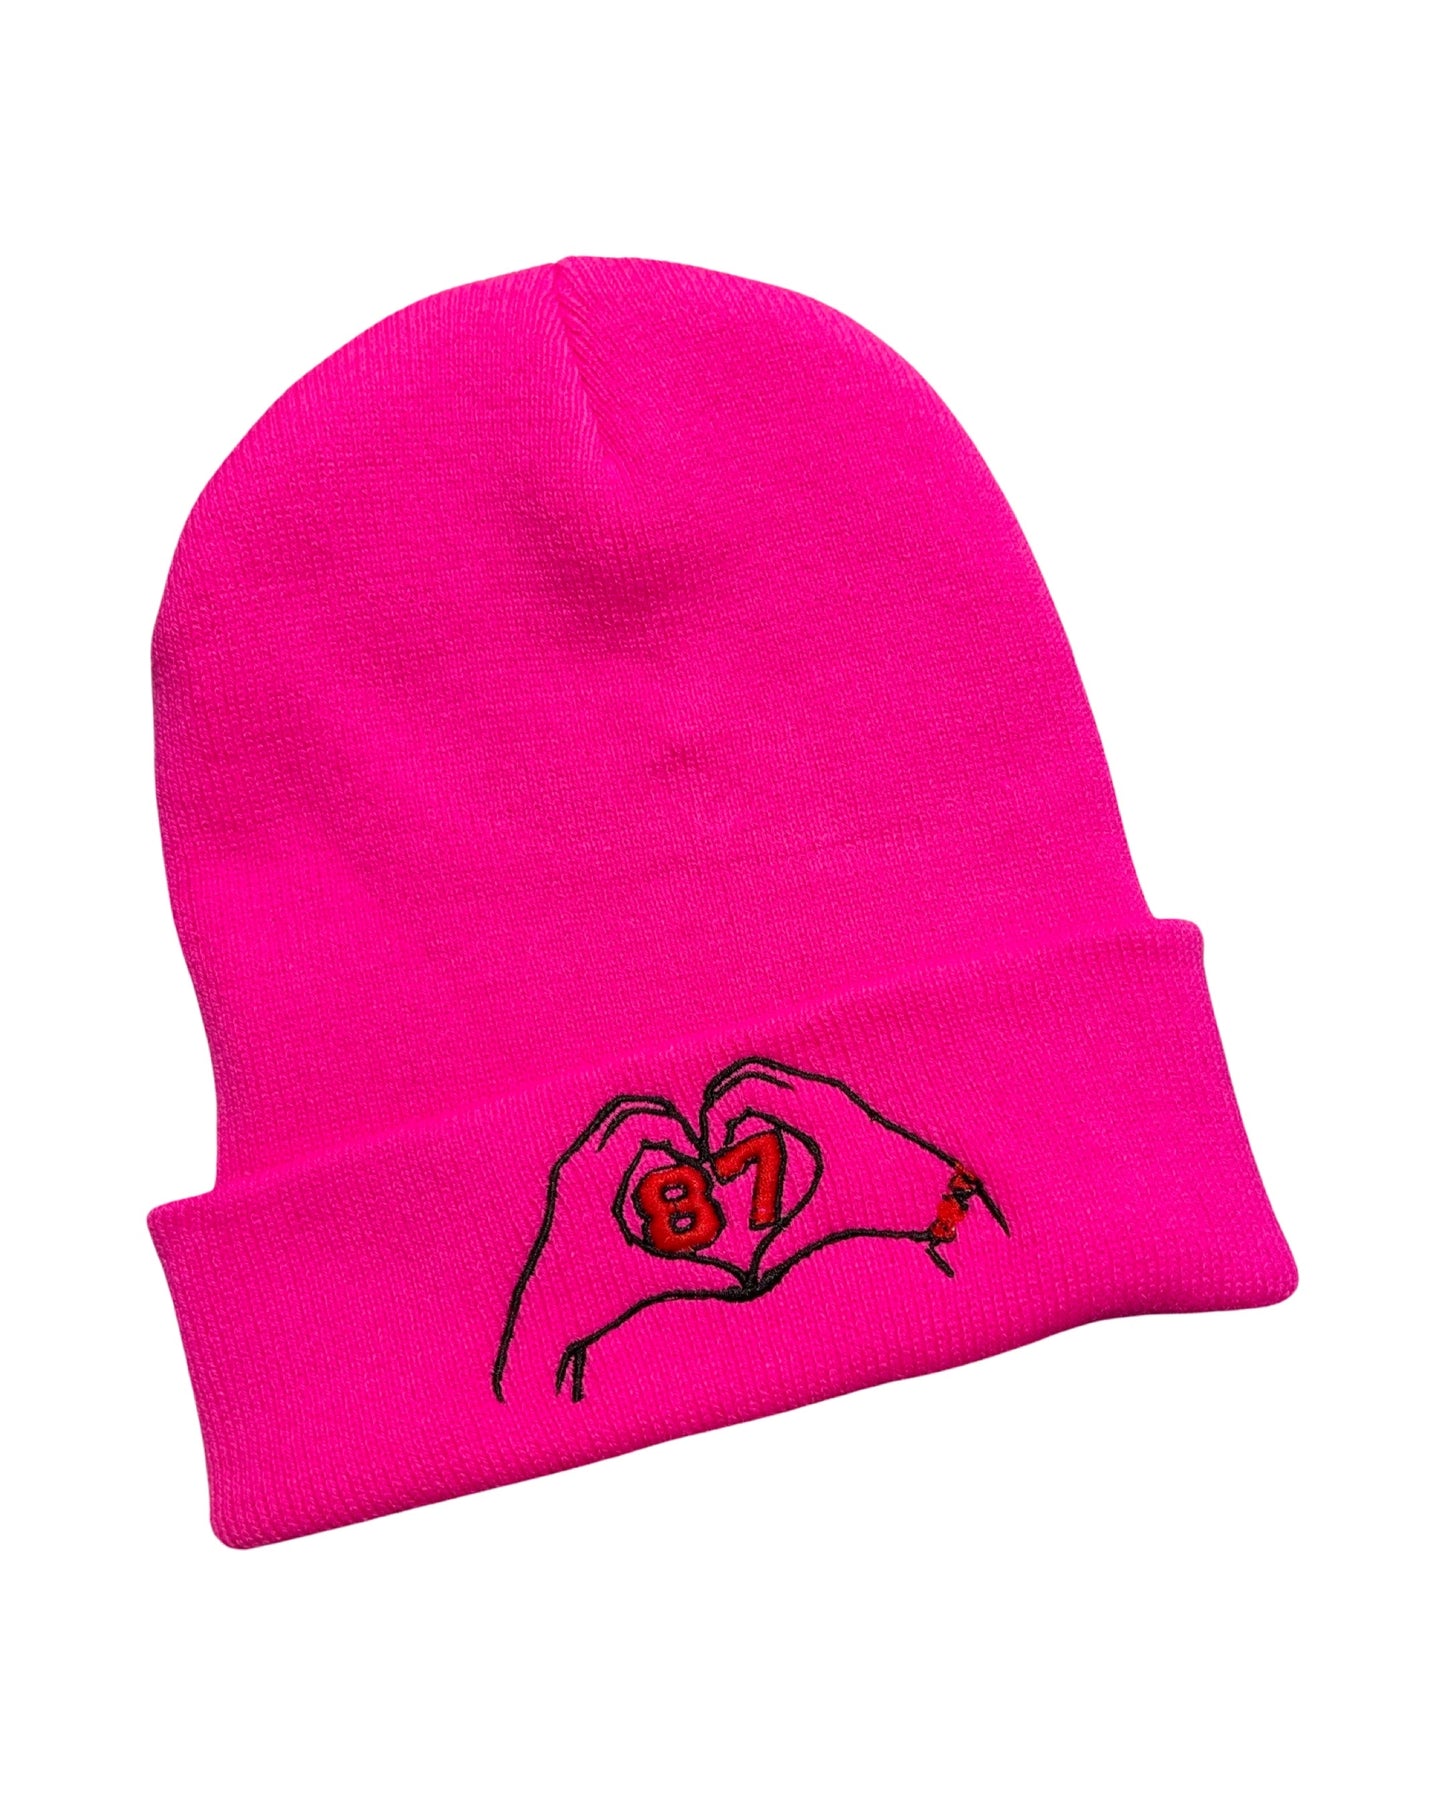 neon pink beanie embroidered with two hands forming a heart with the number 87 inside the heart